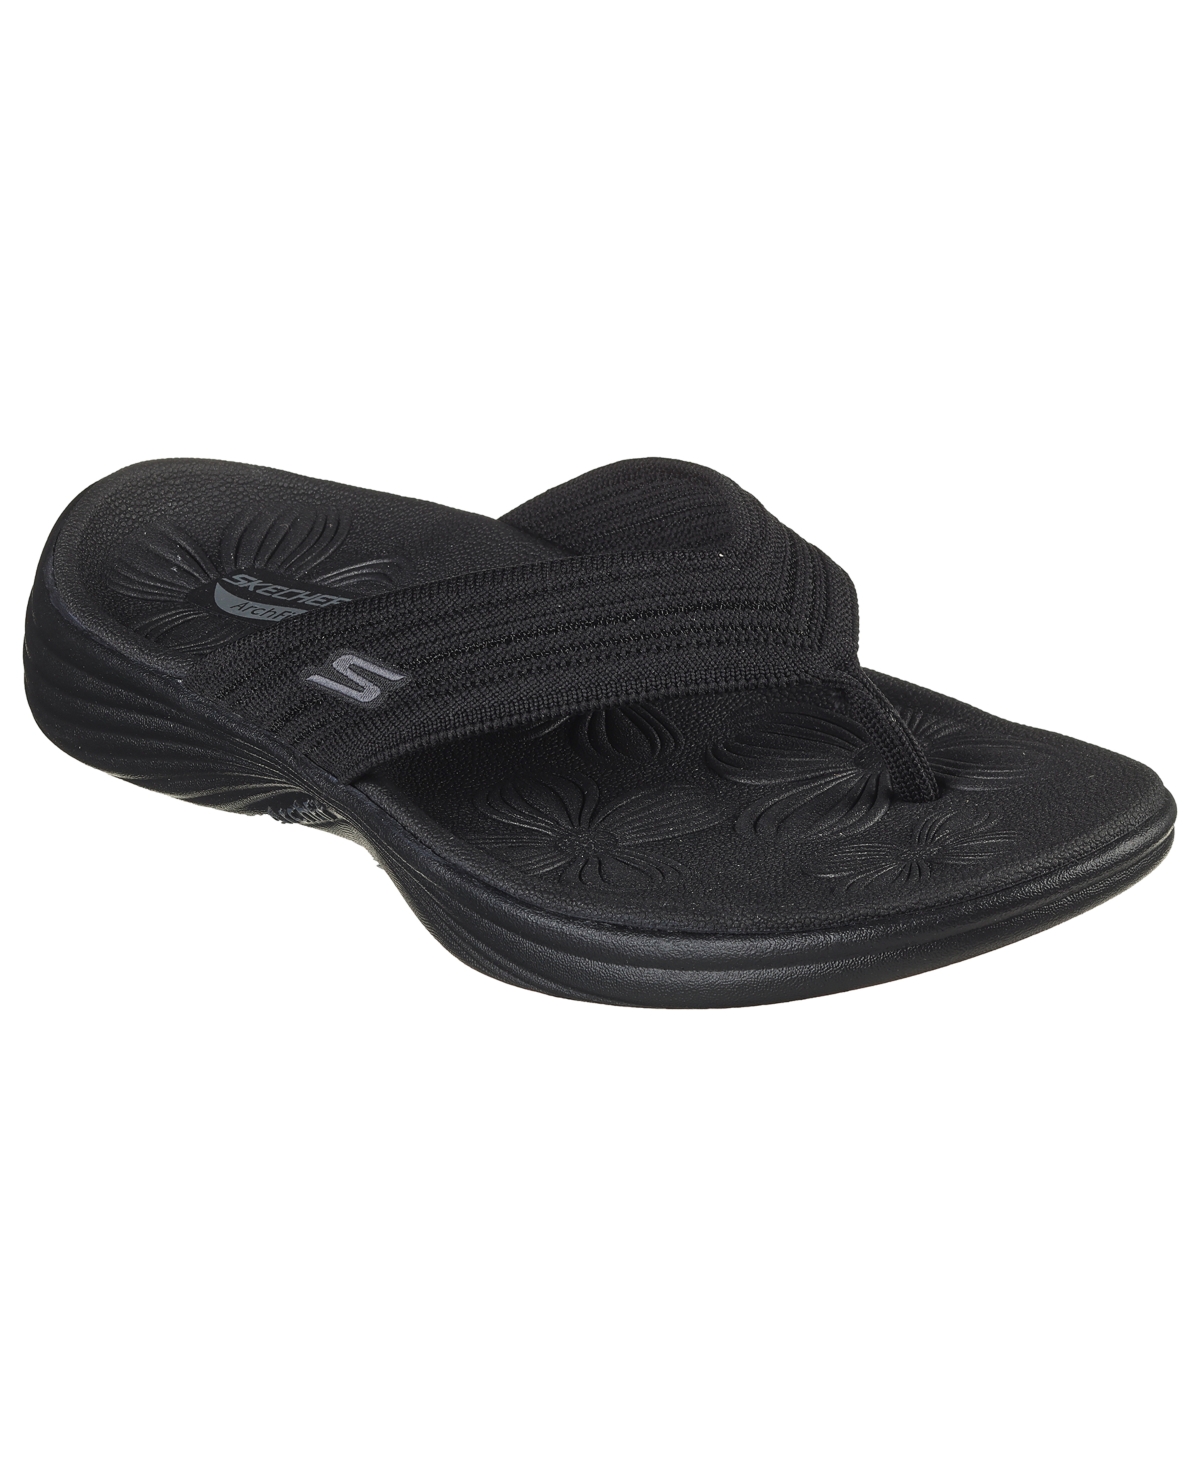 Women's Go Walk Arch Fit Radiance - Lure Thong Sandals from Finish Line - Black